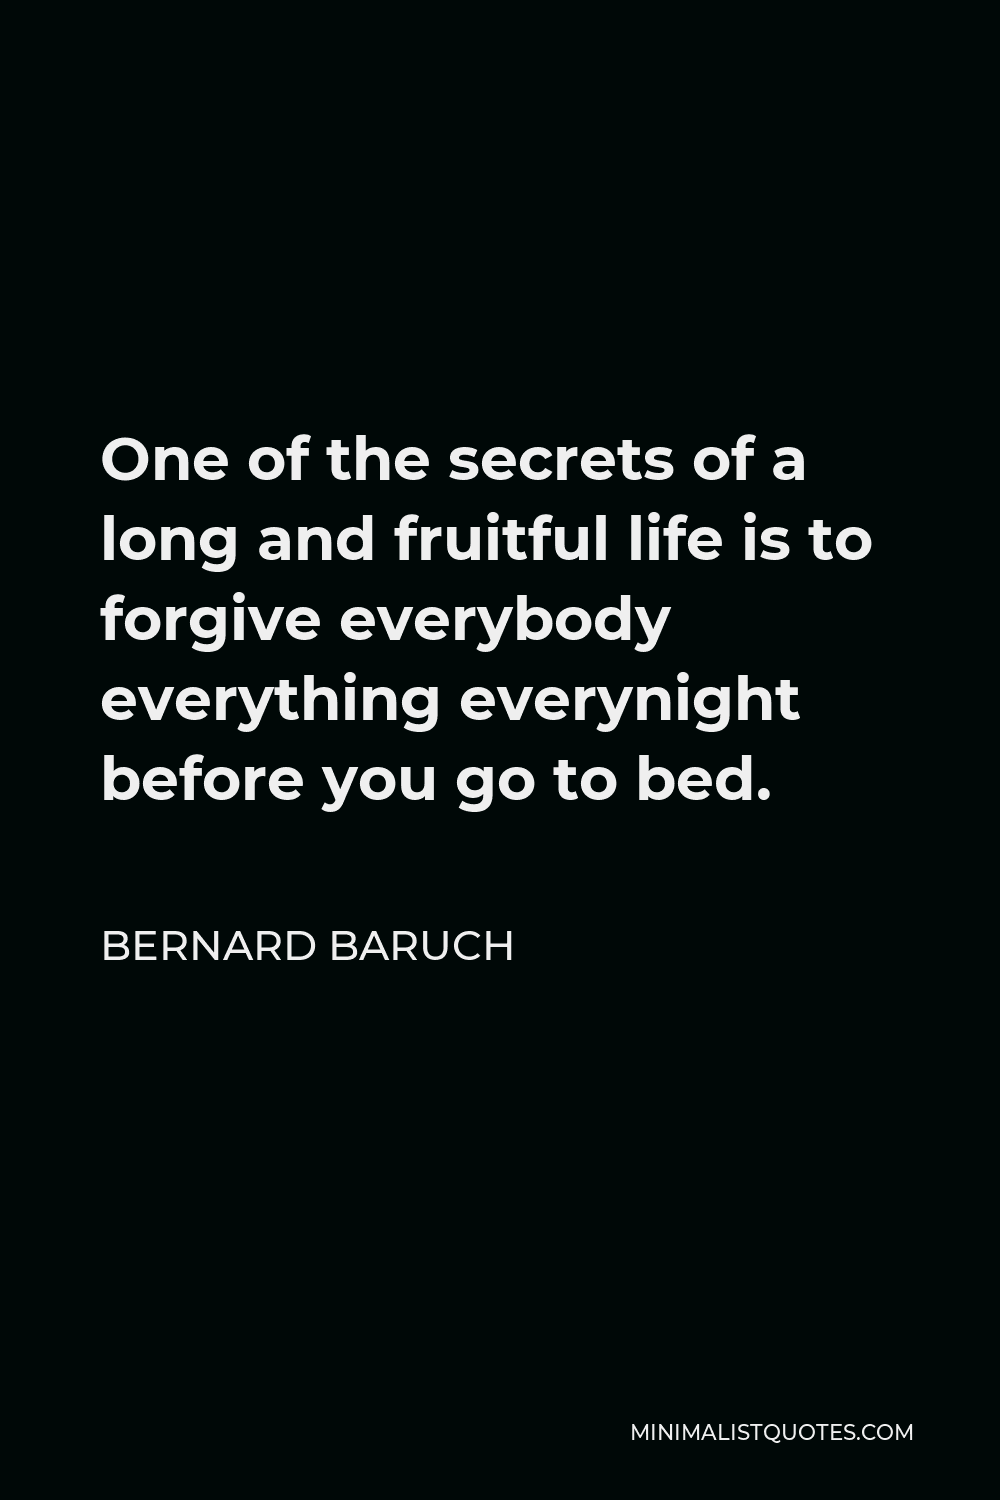 Bernard Baruch Quote - One of the secrets of a long and fruitful life is to forgive everybody everything everynight before you go to bed.